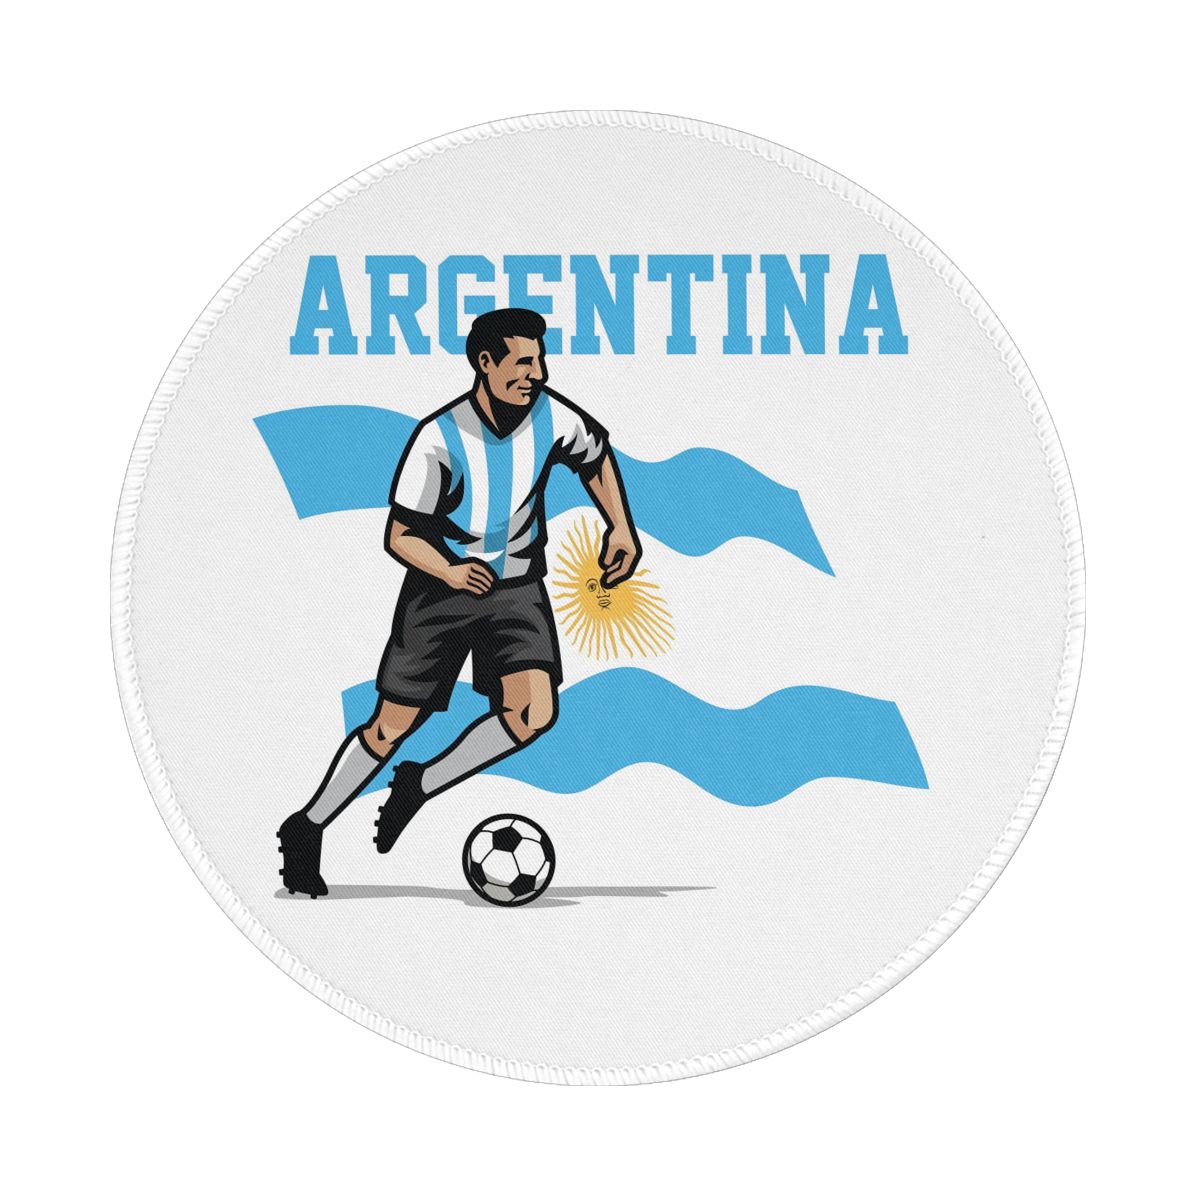 Argentina Soccer Player Waterproof Round Mouse Pad for Wireless Mouse